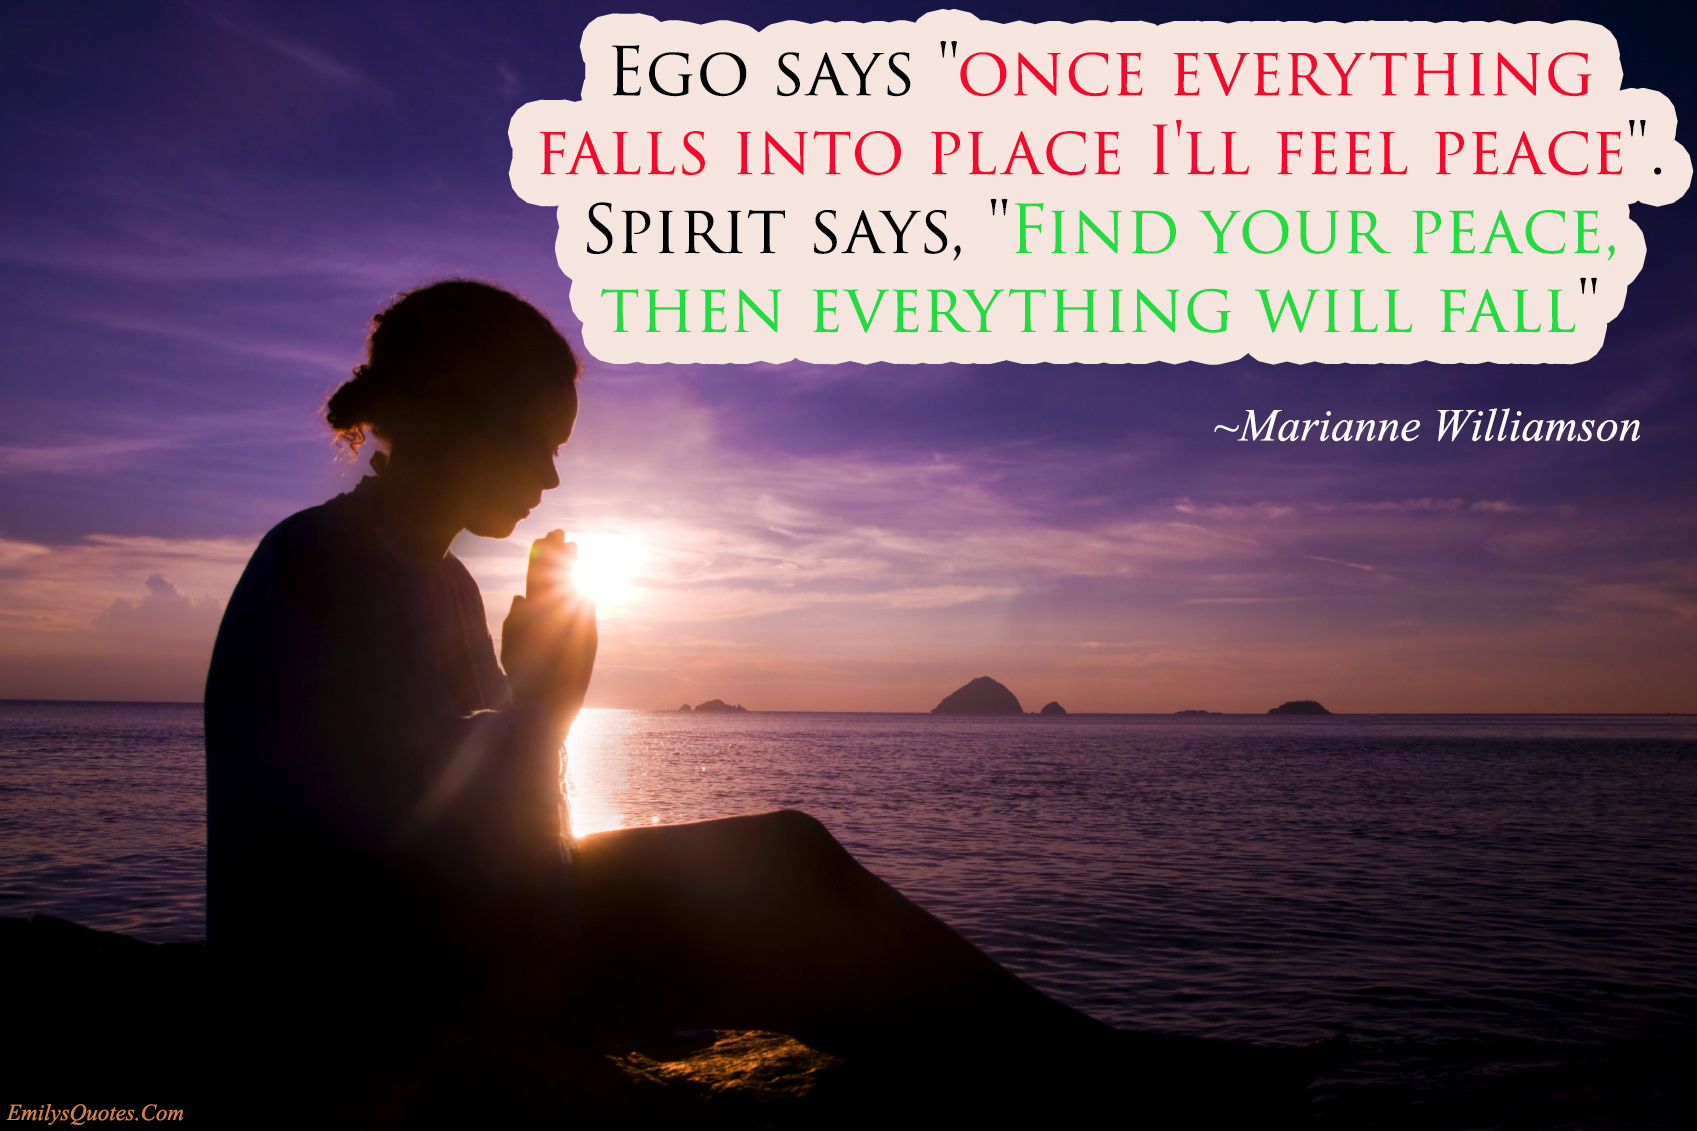 Ego says “once everything falls into place I’ll feel peace”. Spirit says